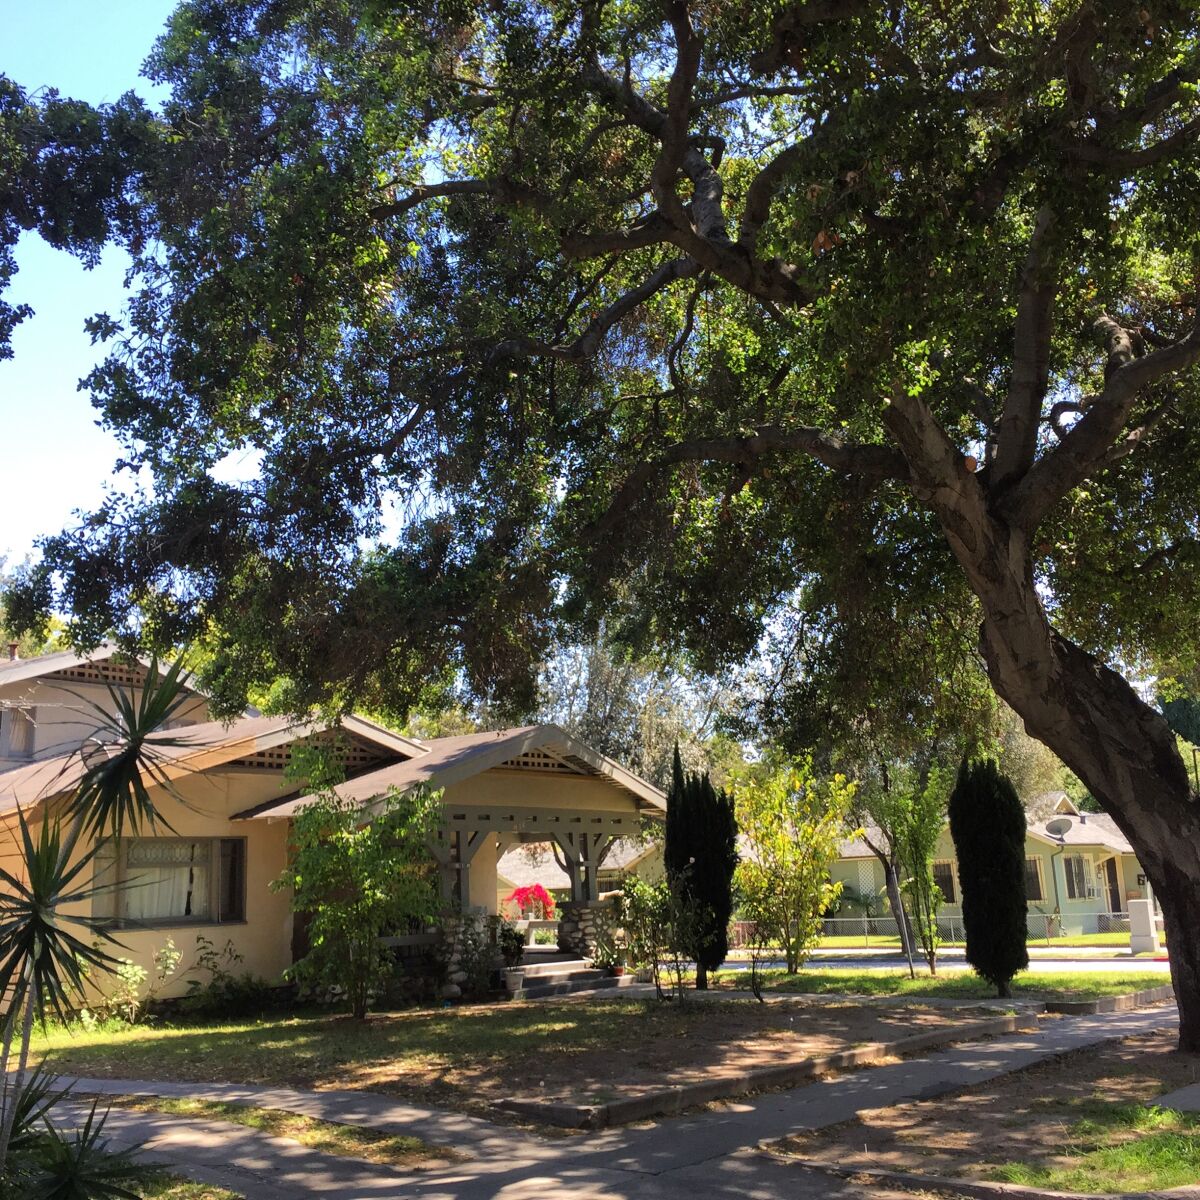 One of the houses where science fiction author Octavia E. Butler lived in Pasadena.